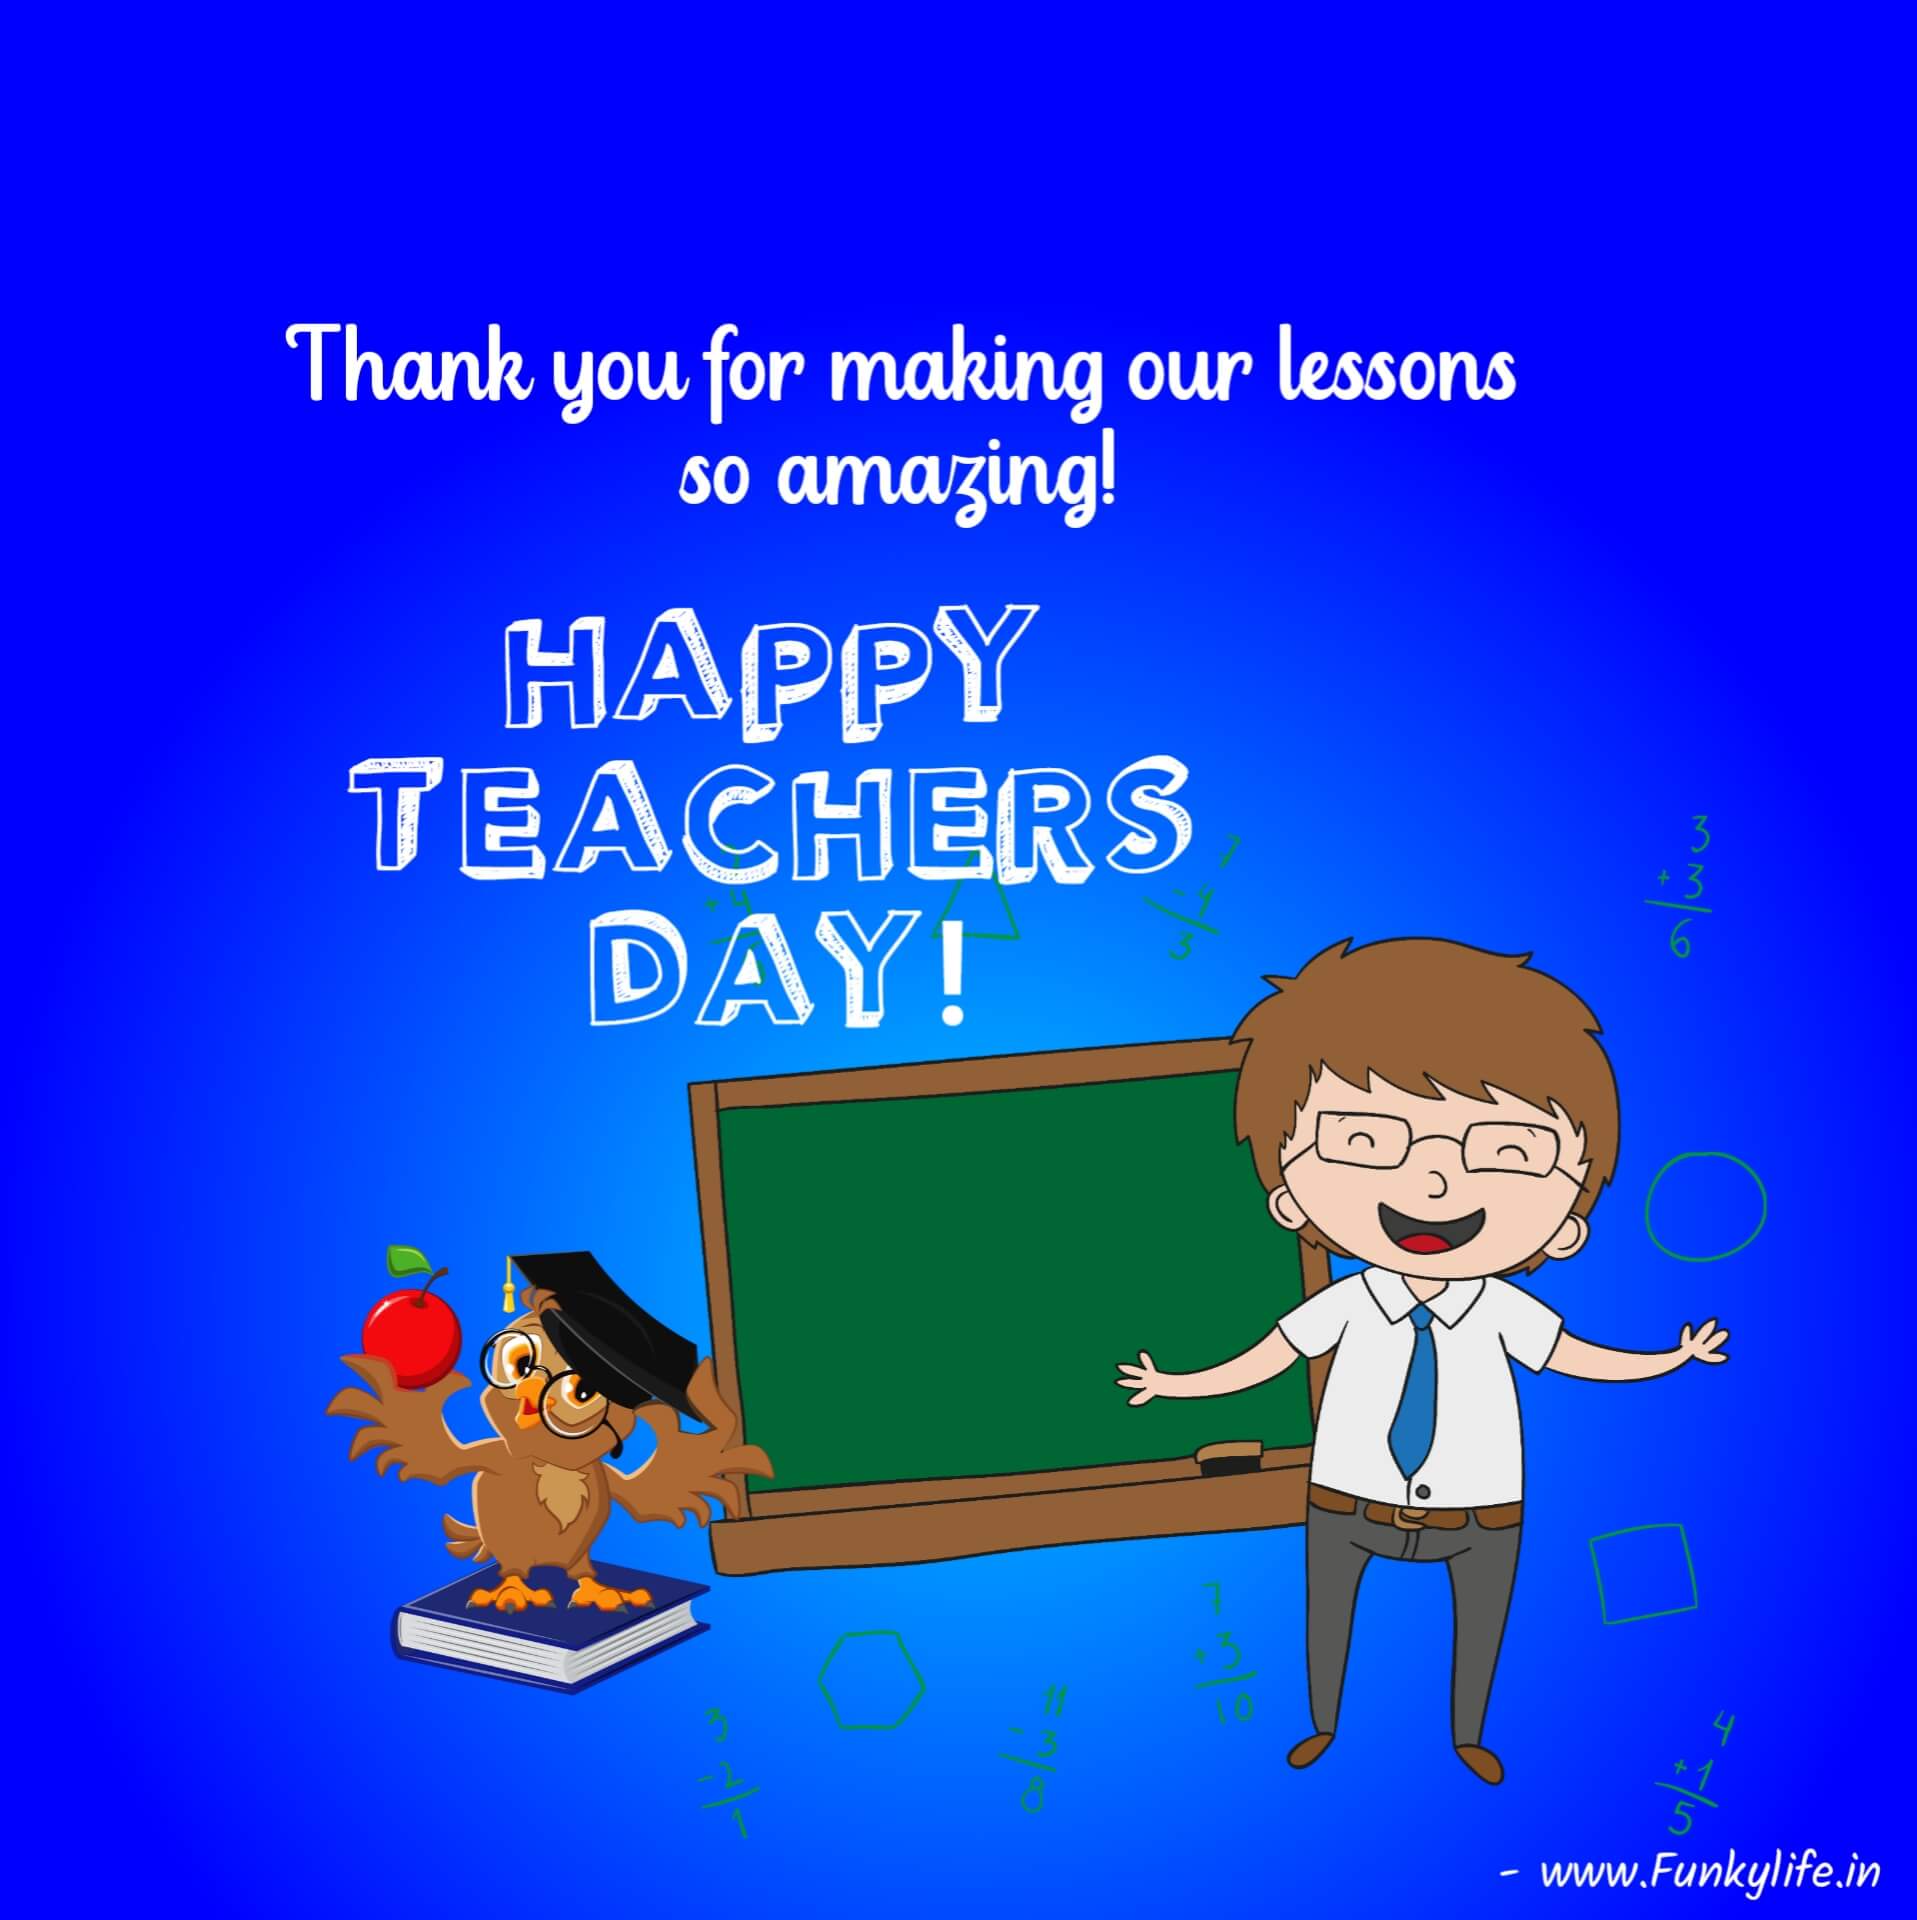 Teachers Day Wishes in English